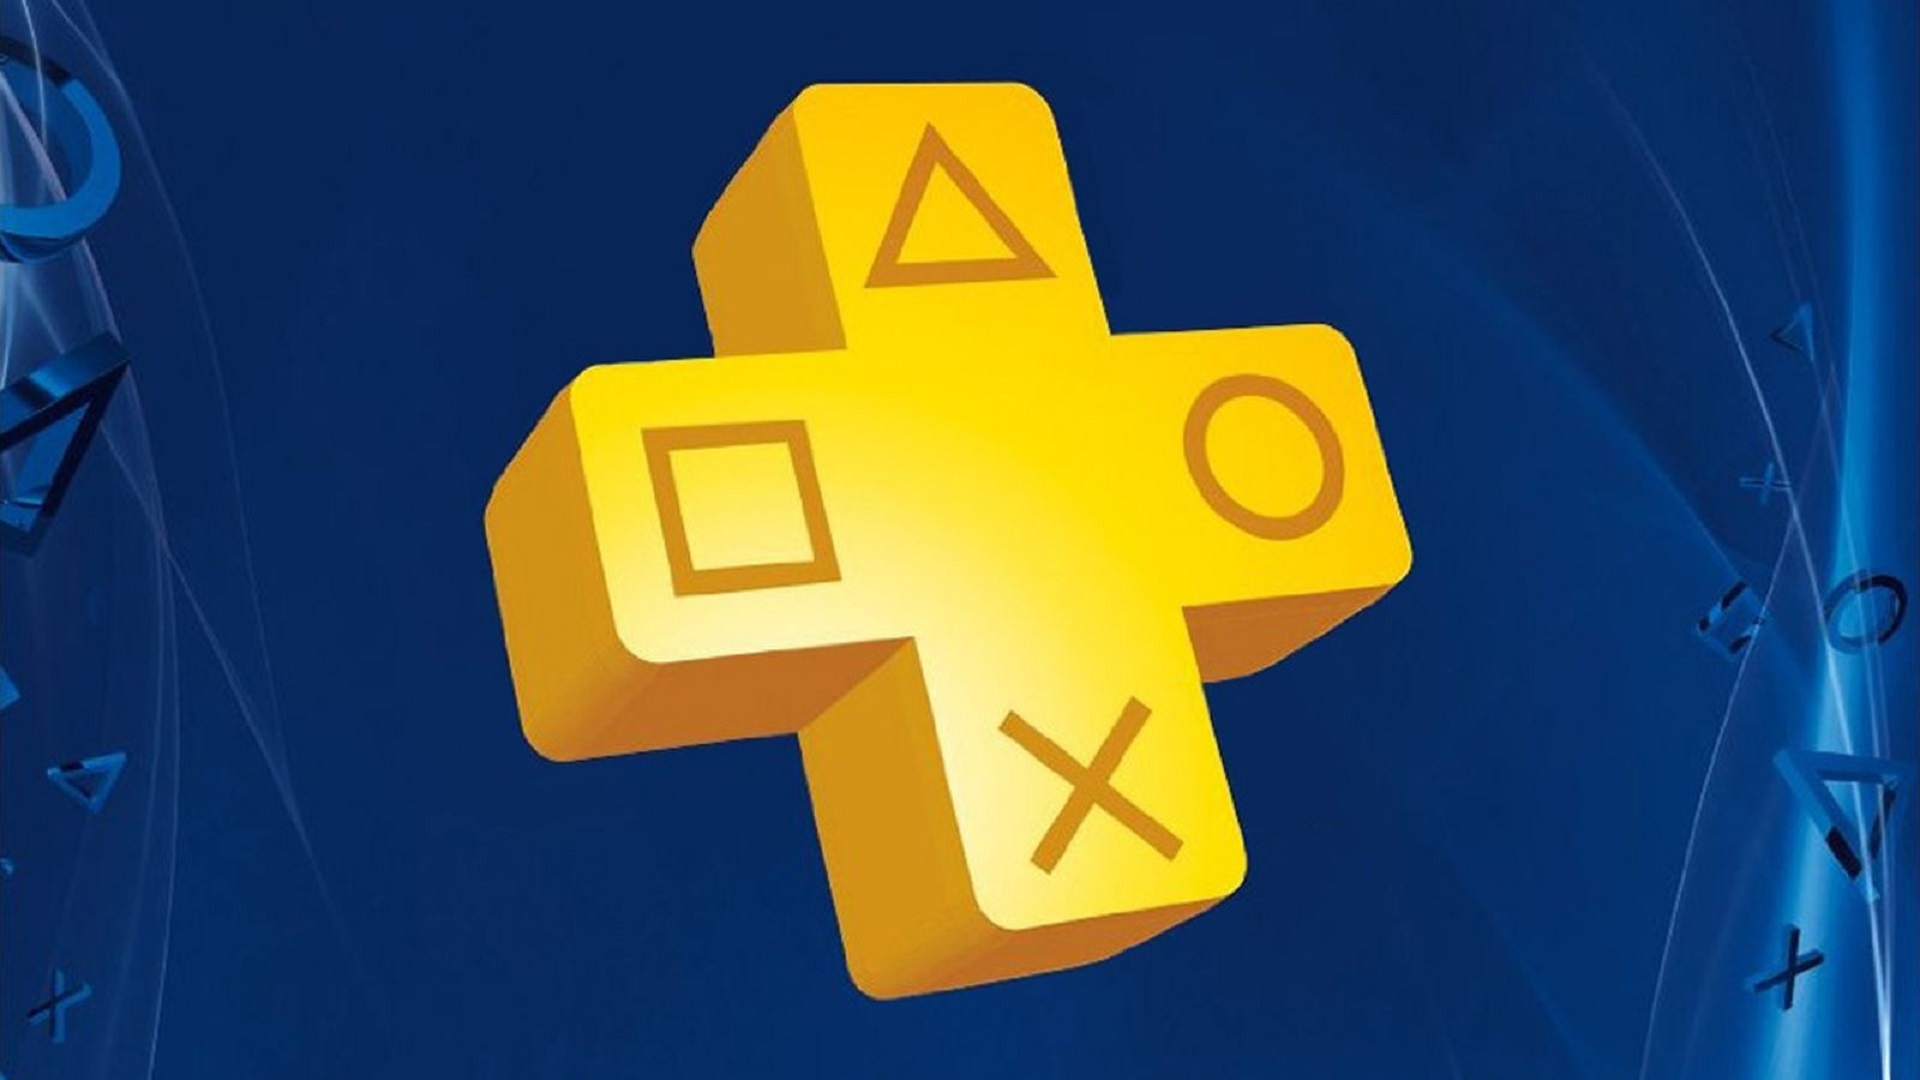 PlayStation Plus Check out the Free Games for December